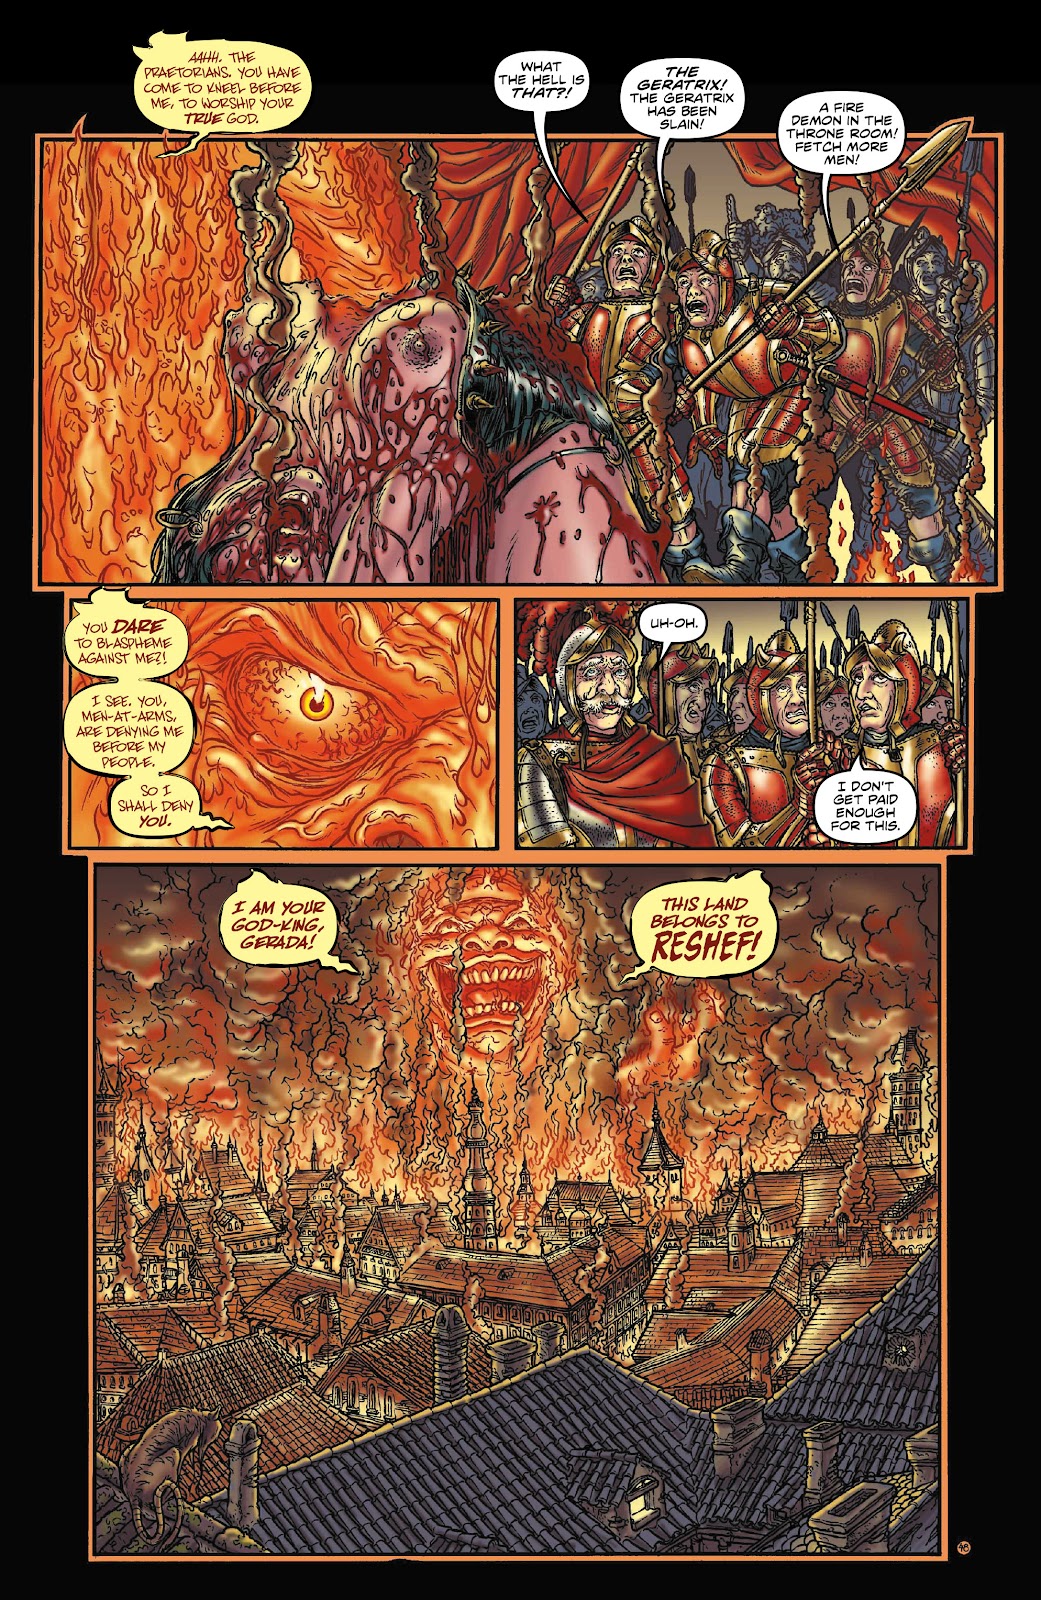 Rogues!: The Burning Heart issue 3 - Page 6